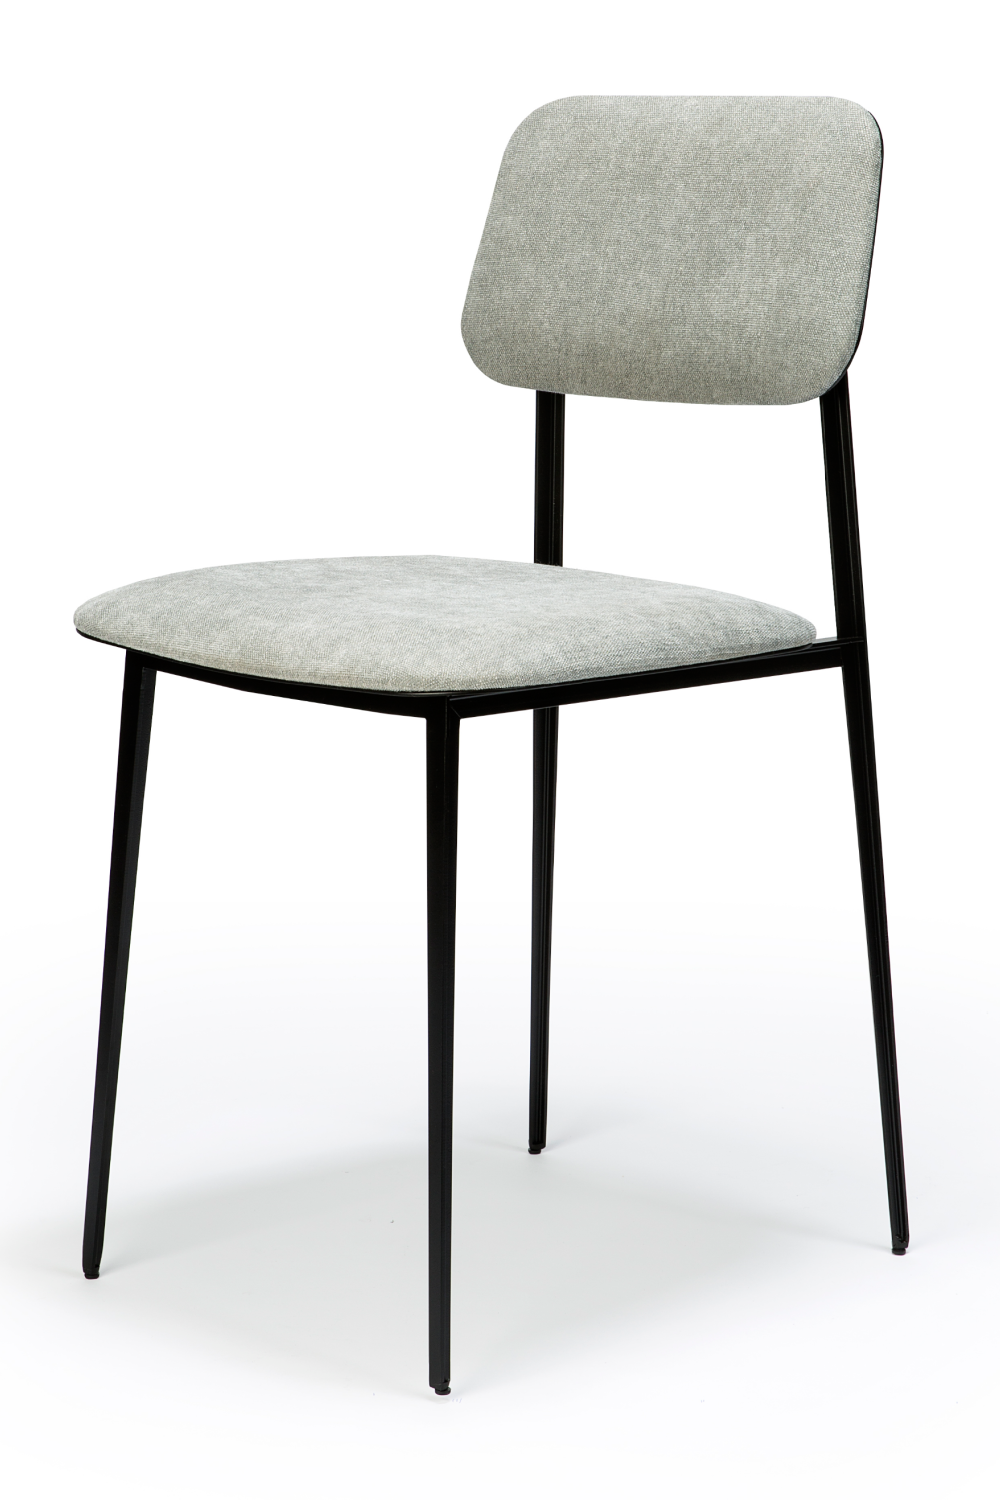 Industrial Dining Chair | Ethnicraft DC | Oroa.com